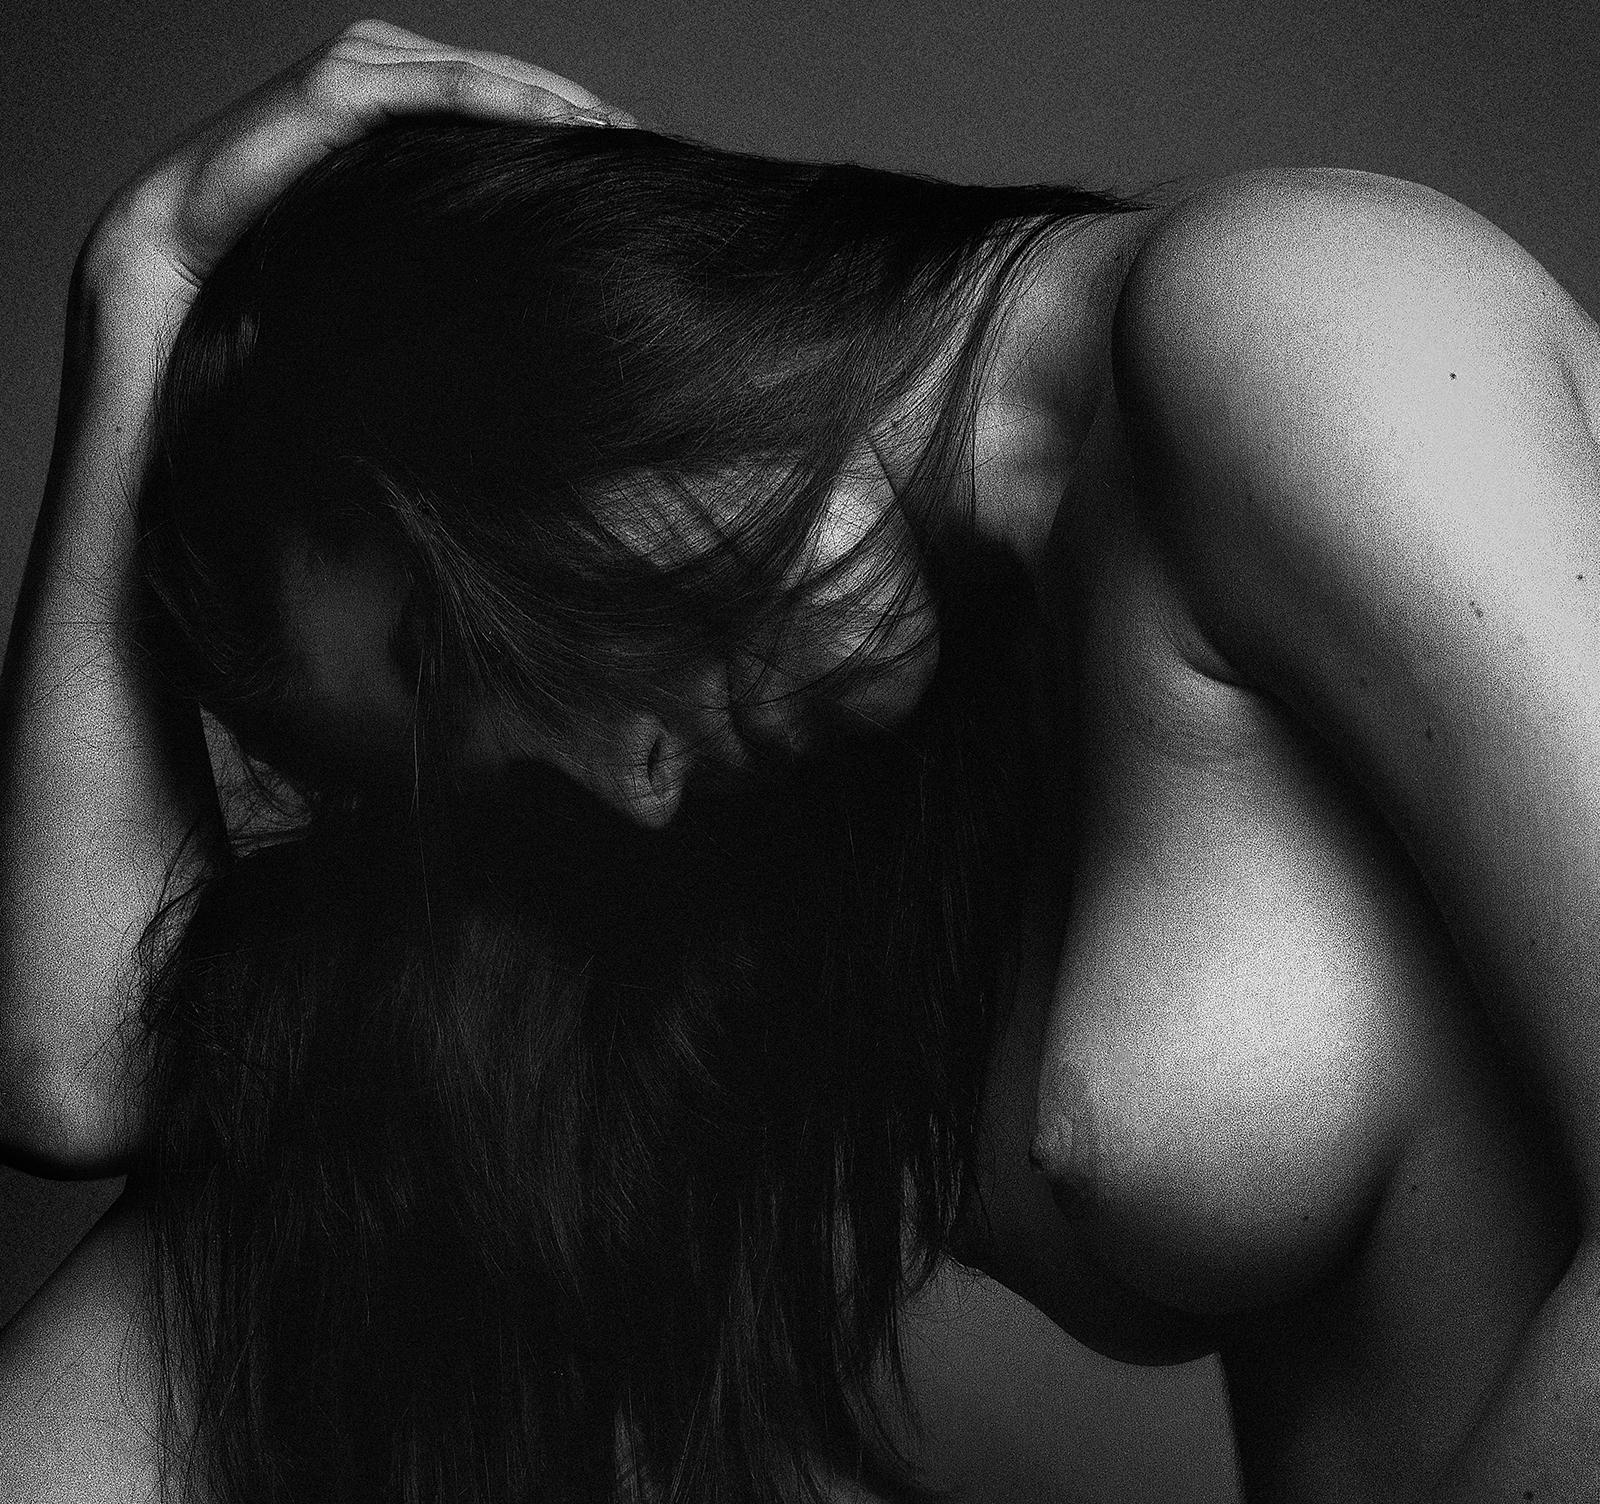 Sophie- Signed limited edition nude print, Black white, Naked woman, Portrait - Photograph by Ian Sanderson